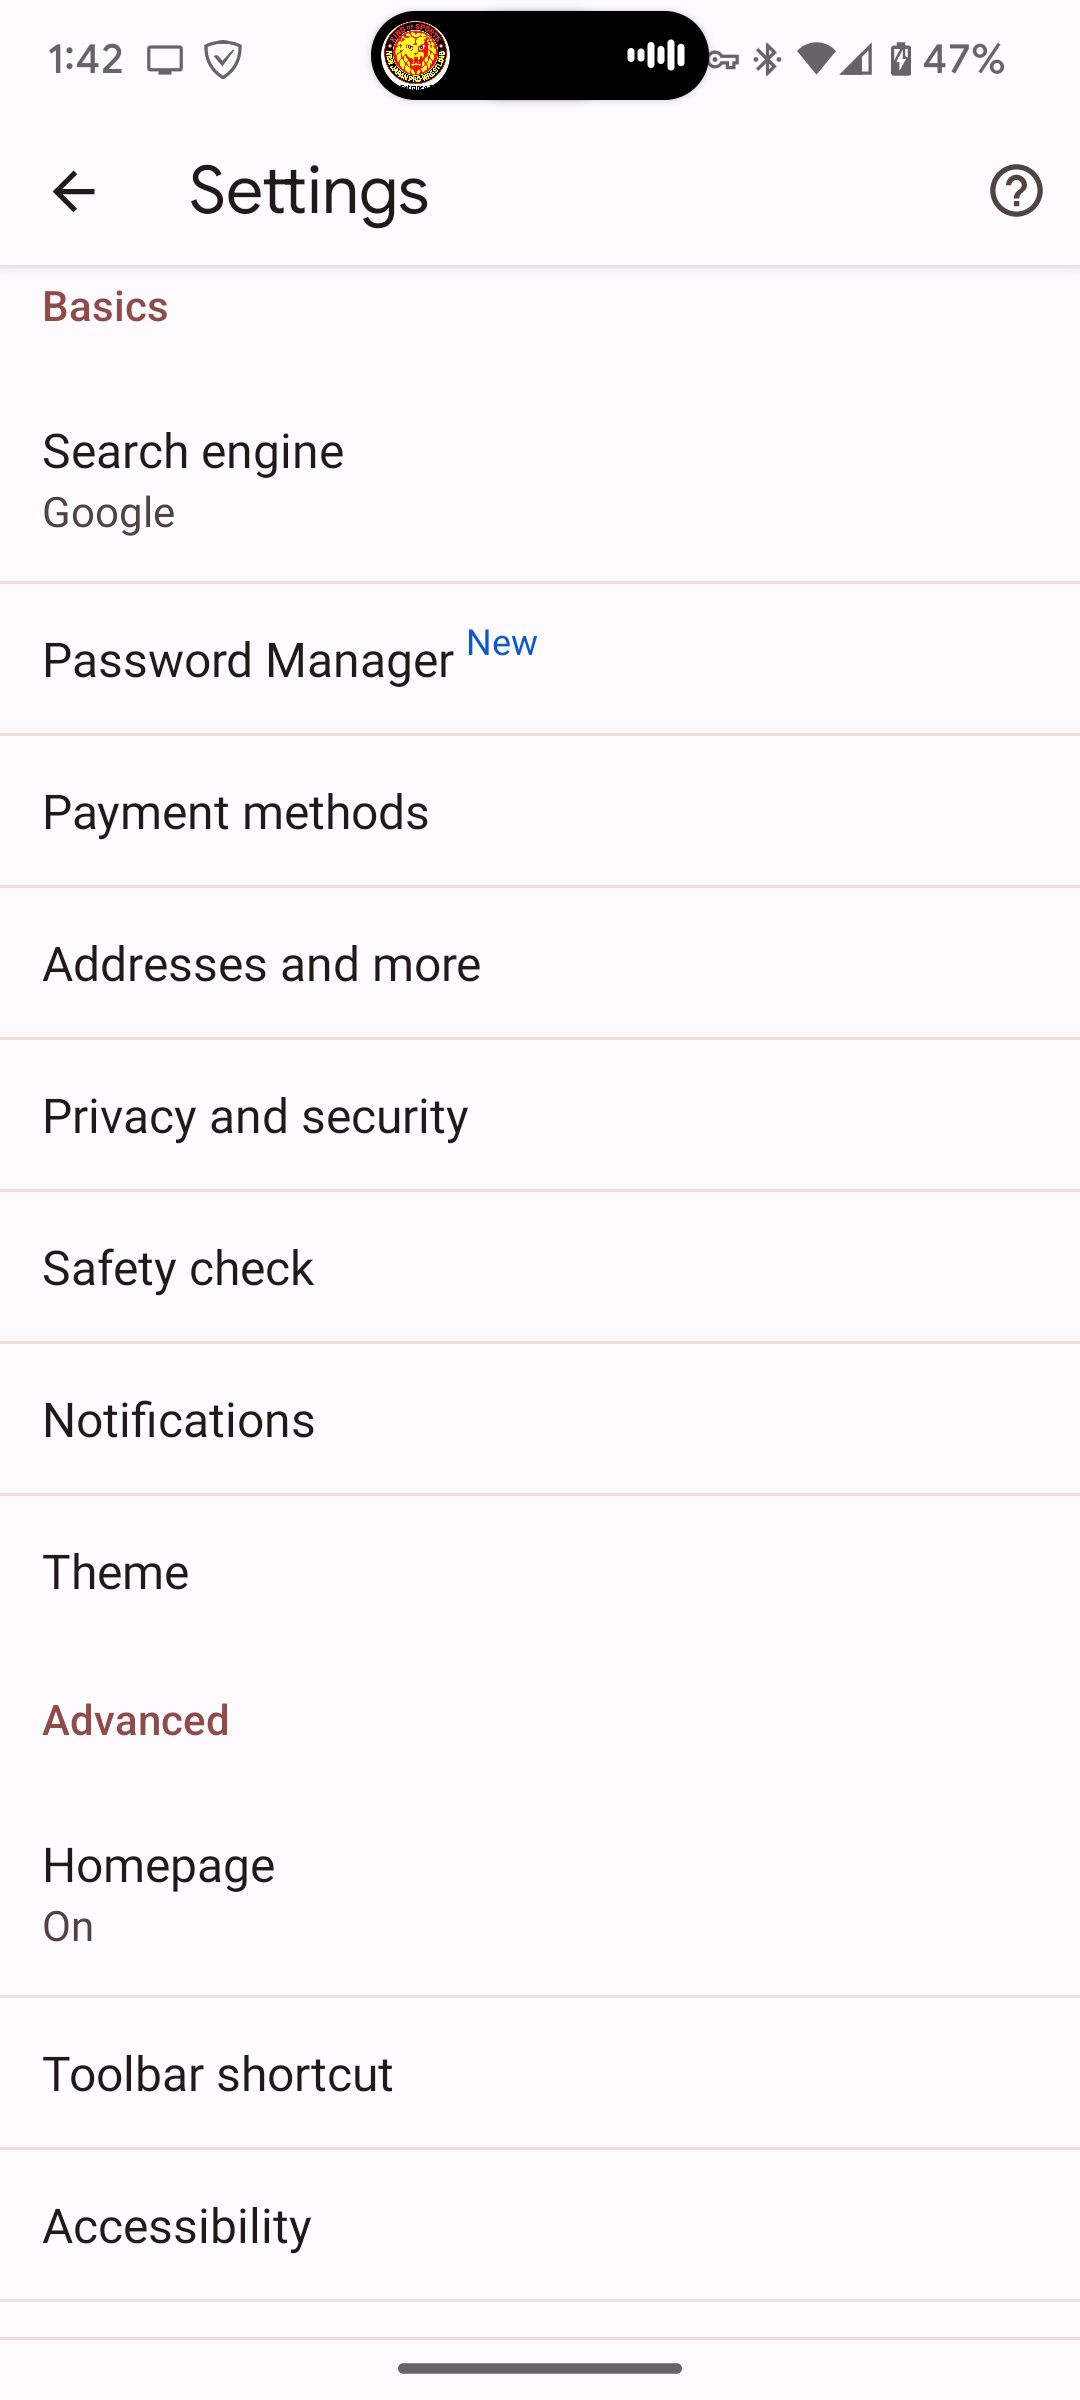 The settings page in Google Chrome